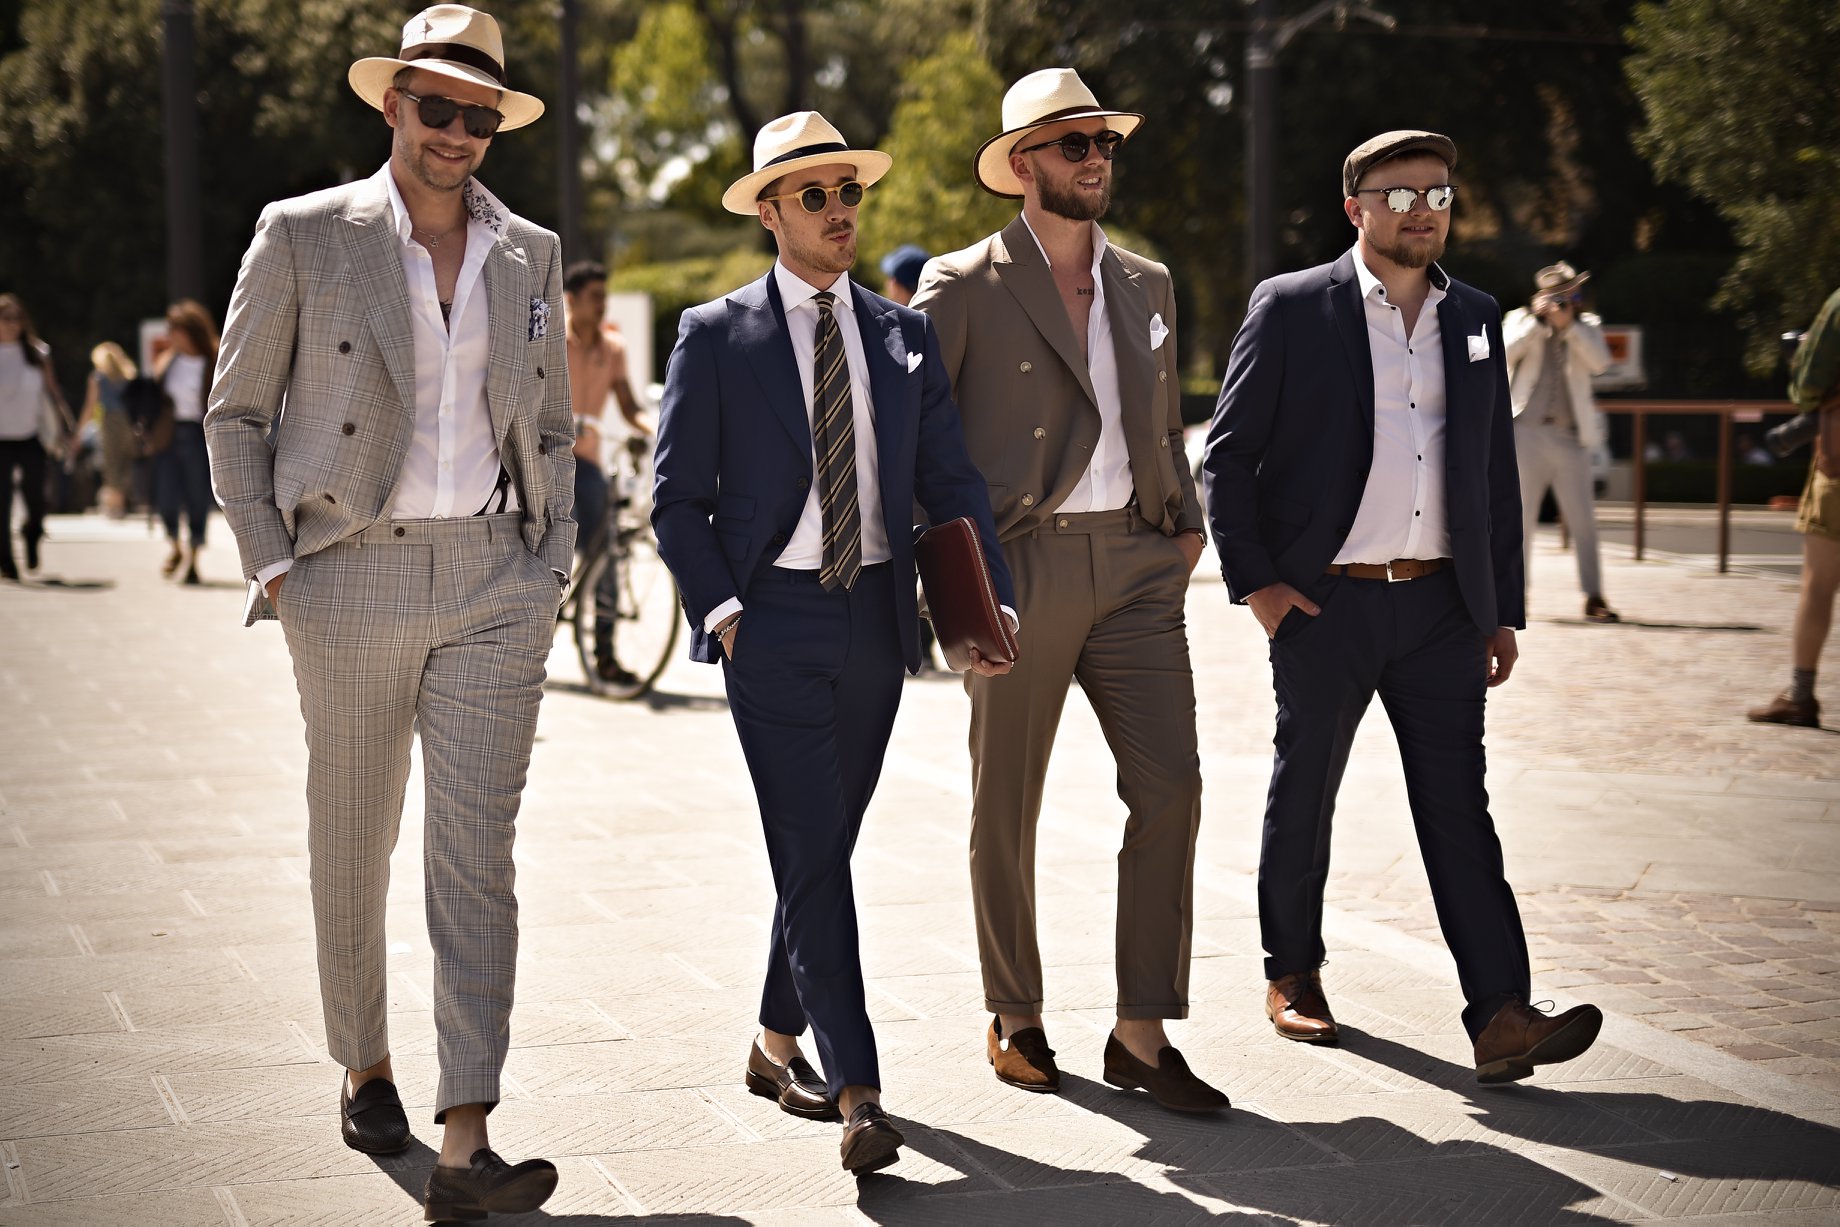 The Best Glasses Street Style Looks From Pitti Uomo’s Spring 2019 Menswear Shows in Florence Men Eyewear Style